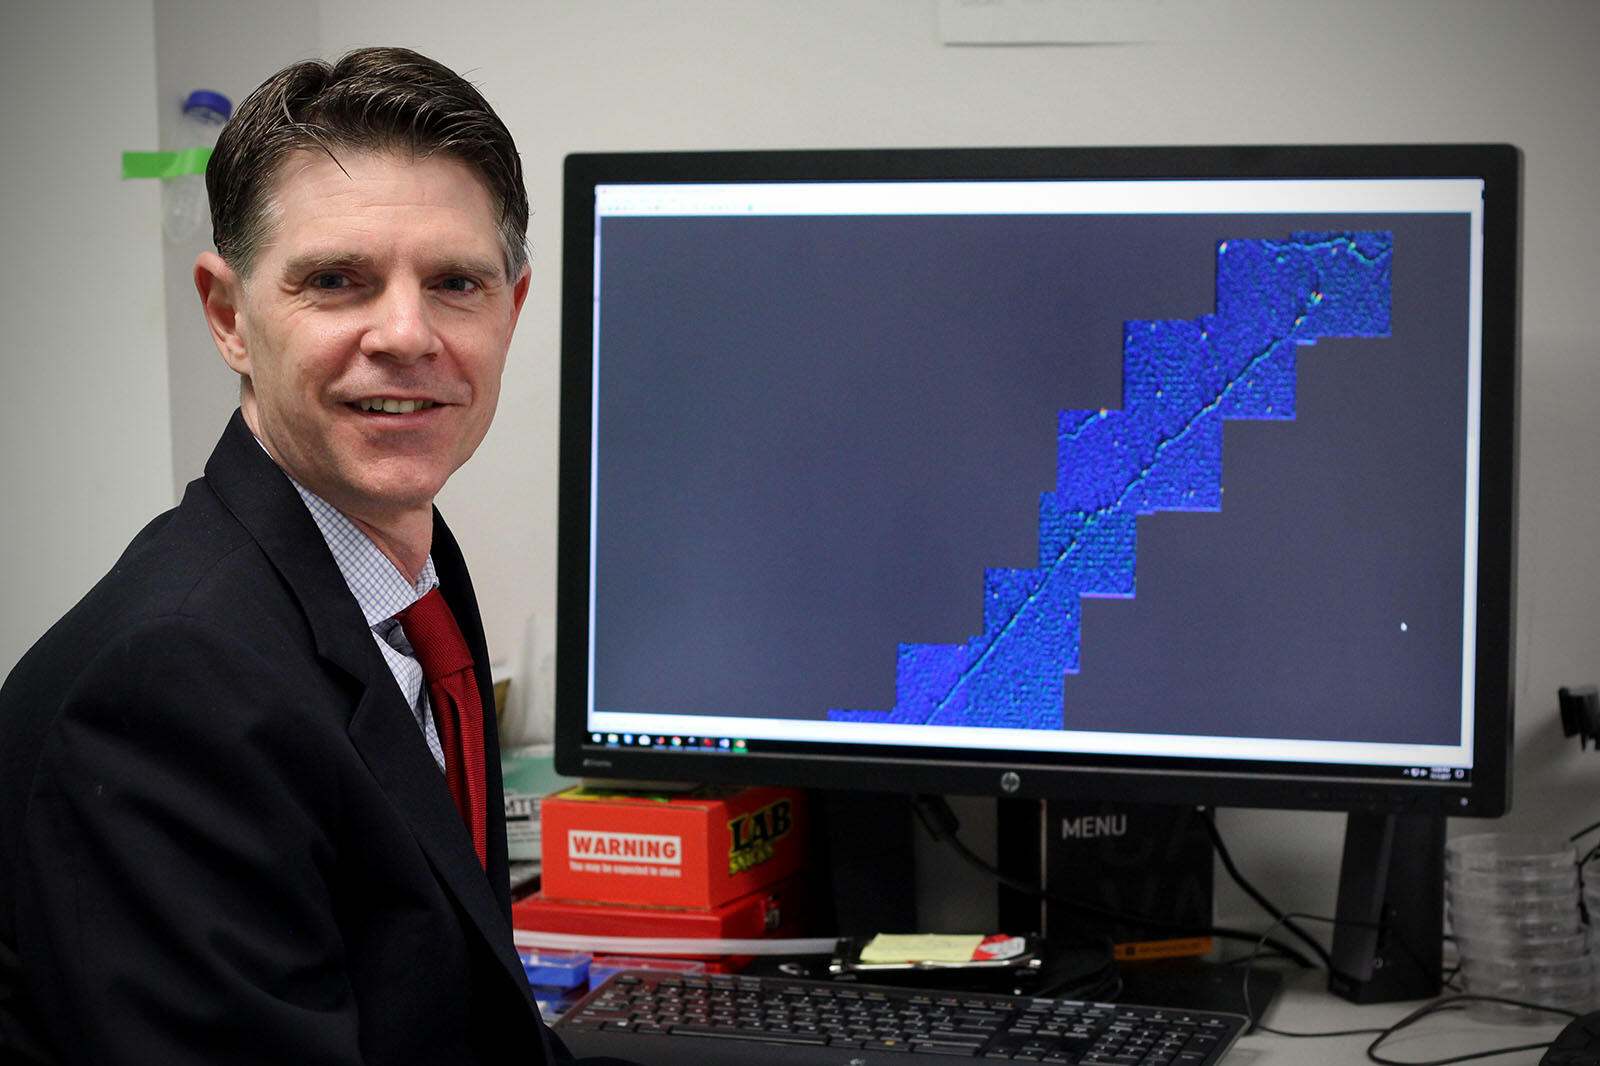 Man standing in front of large computer screen with a depiction of DNA strand displayed.